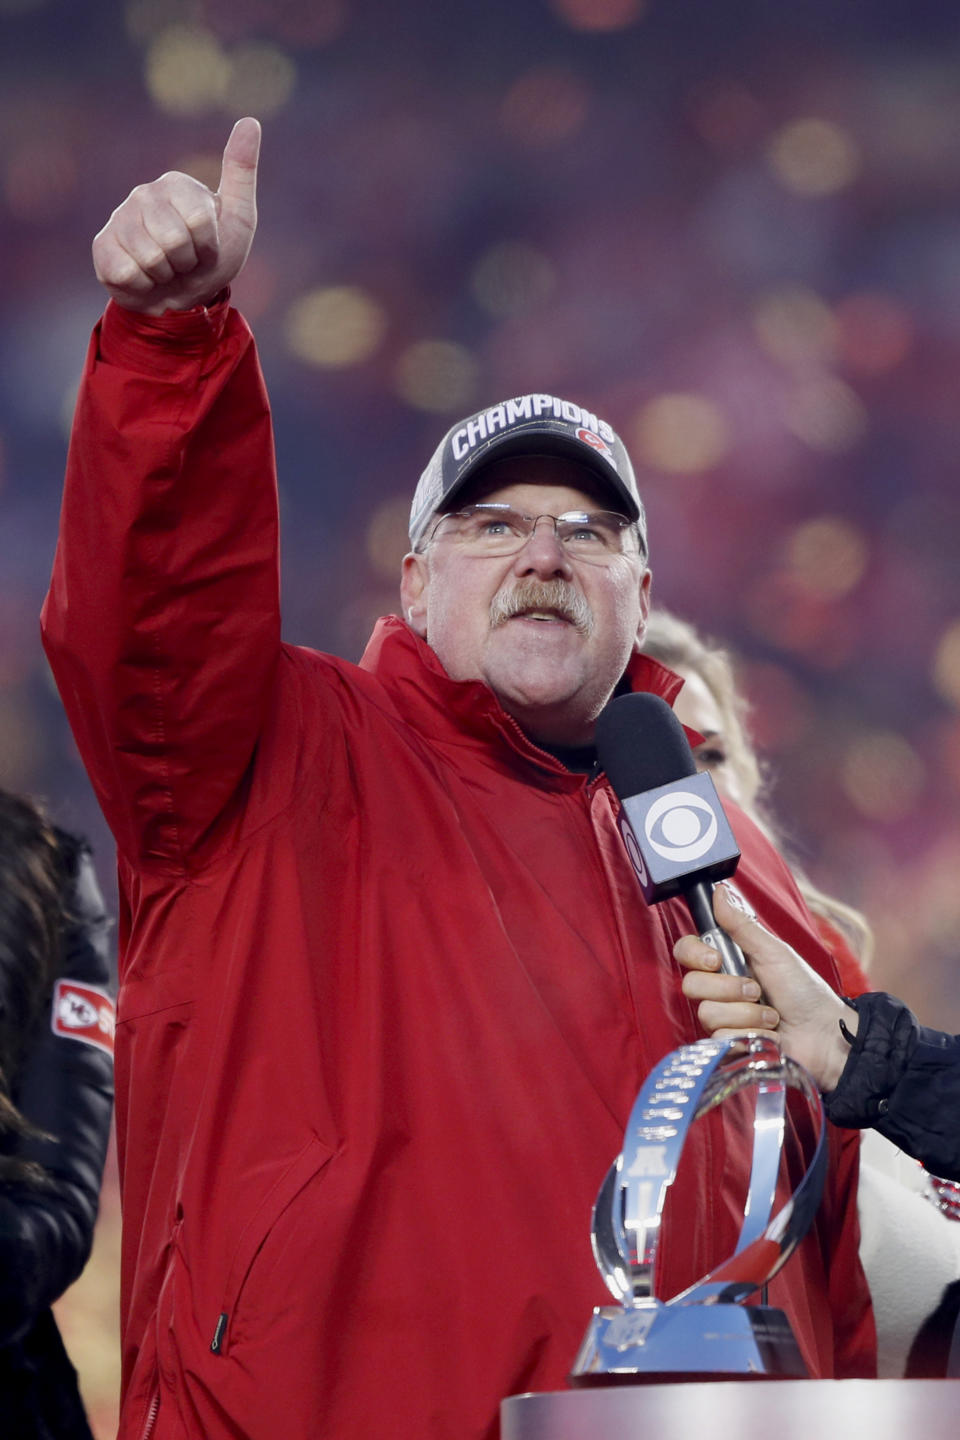 Kansas City Chiefs head coach Andy Reid reacts after winning the NFL AFC Championship football game against the Tennessee Titans Sunday, Jan. 19, 2020, in Kansas City, MO. The Chiefs won 35-24 to advance to Super Bowl 54. (AP Photo/Charlie Neibergall)